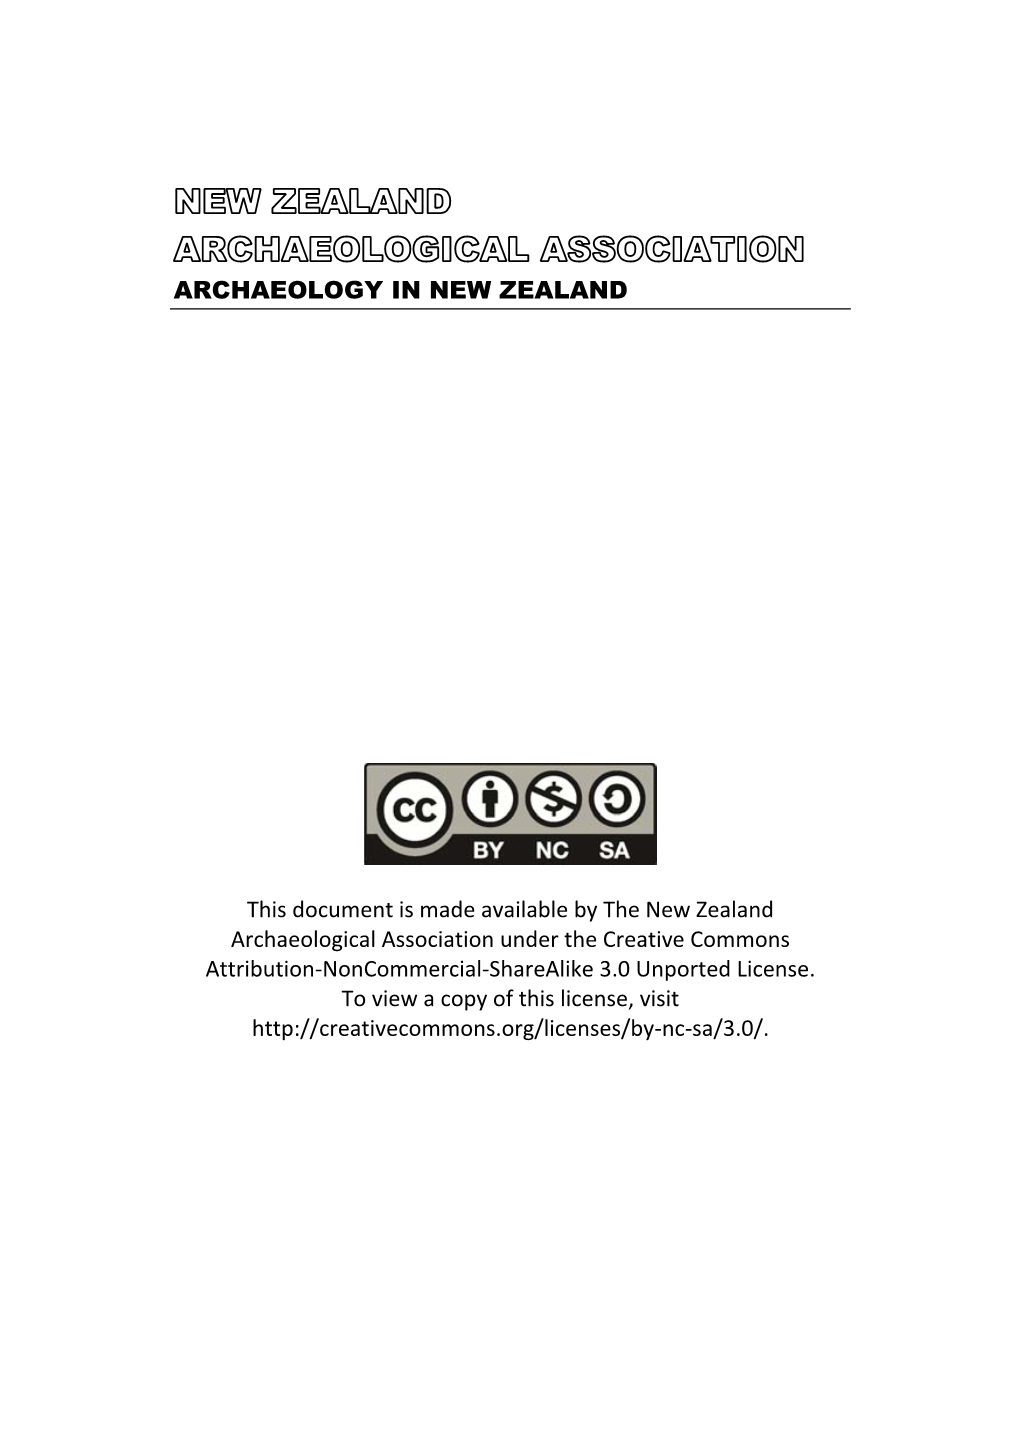 ARCHAEOLOGY in NEW ZEALAND This Document Is Made Available by the New Zealand Archaeological Association Under the Creative Comm